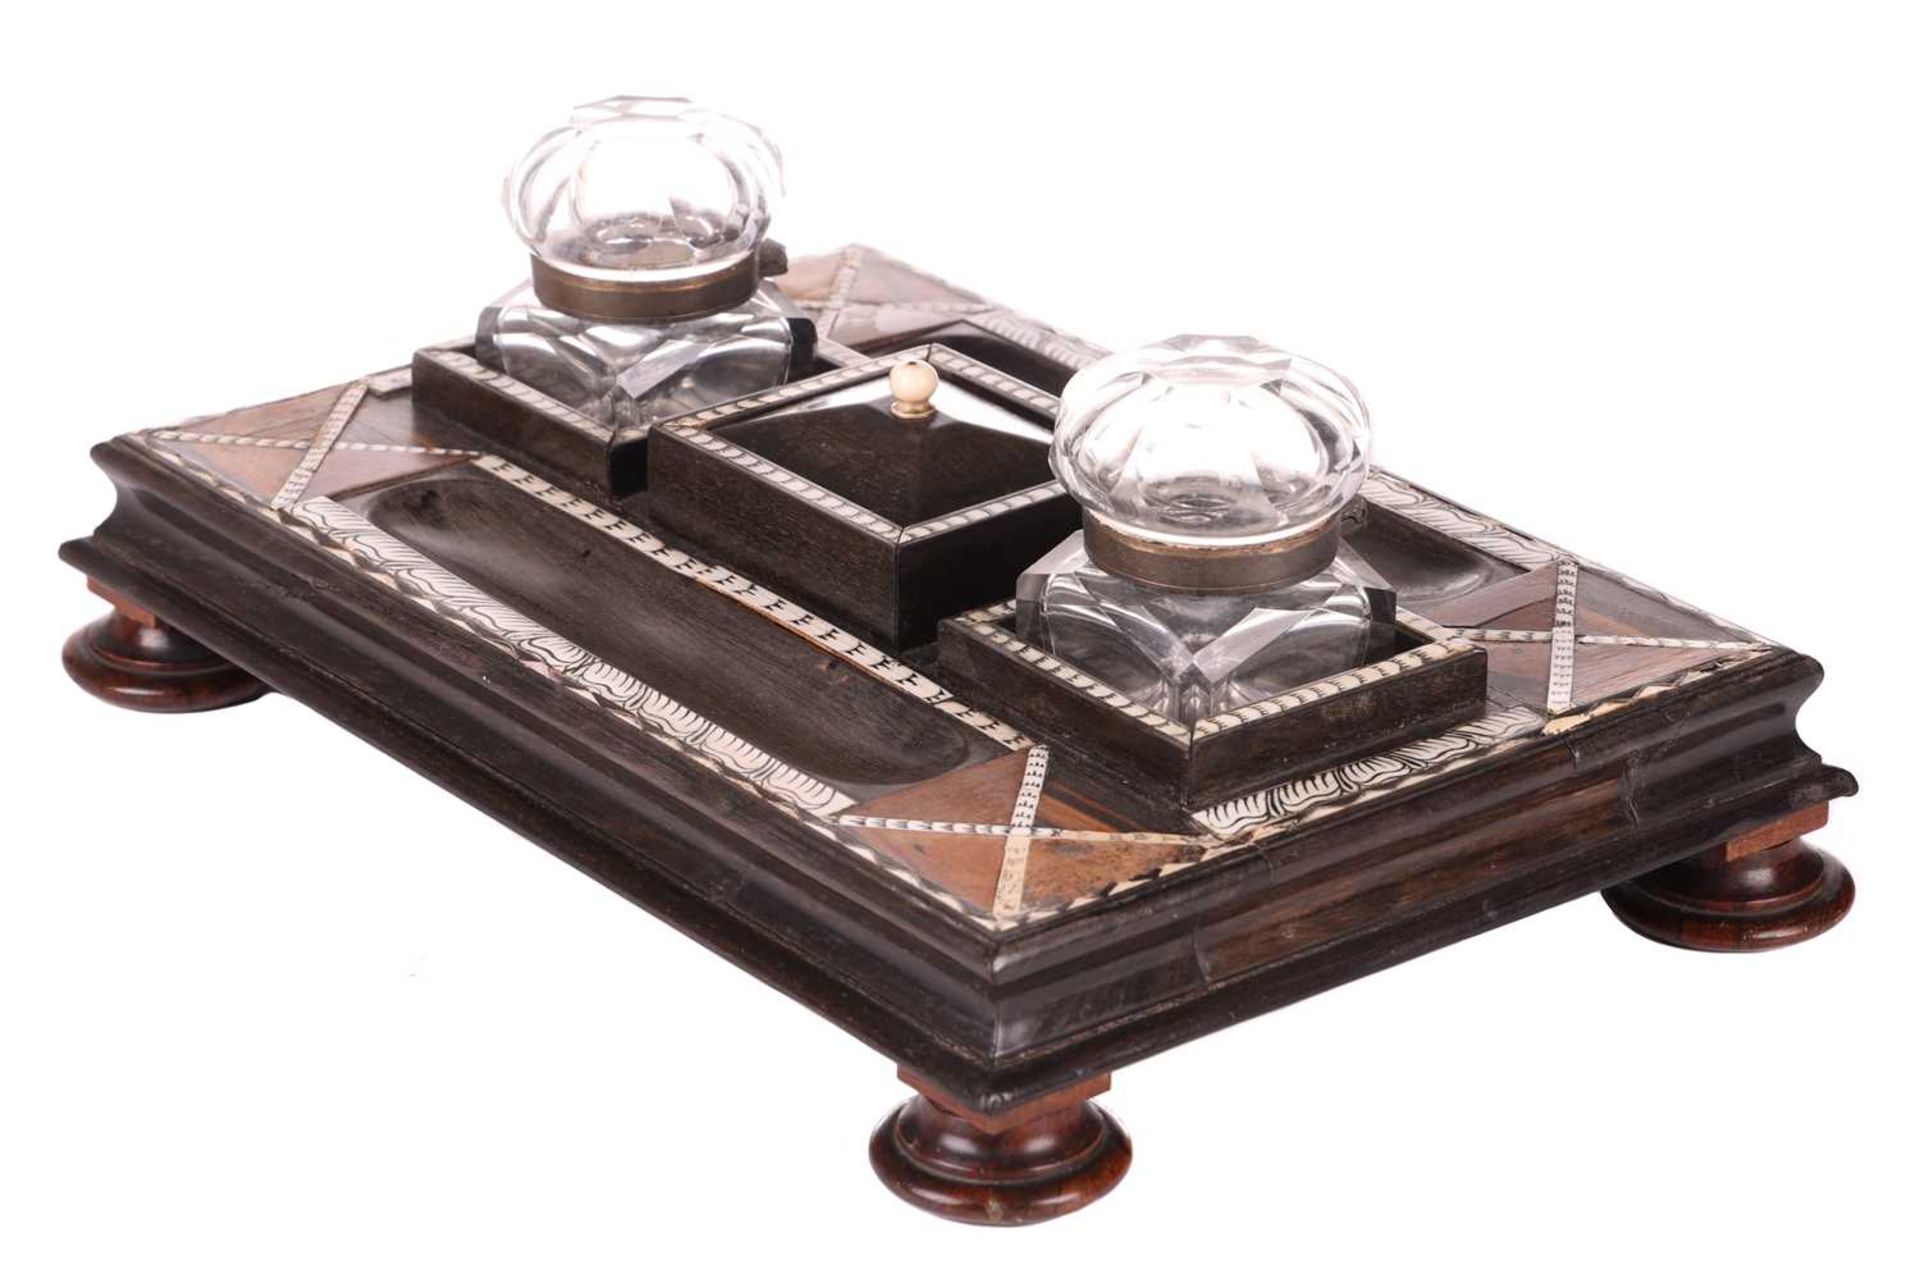 A Ceylonese ebony desk stand with calamander, coconut palm, and rosewood parquetry within pen-worked - Image 3 of 17